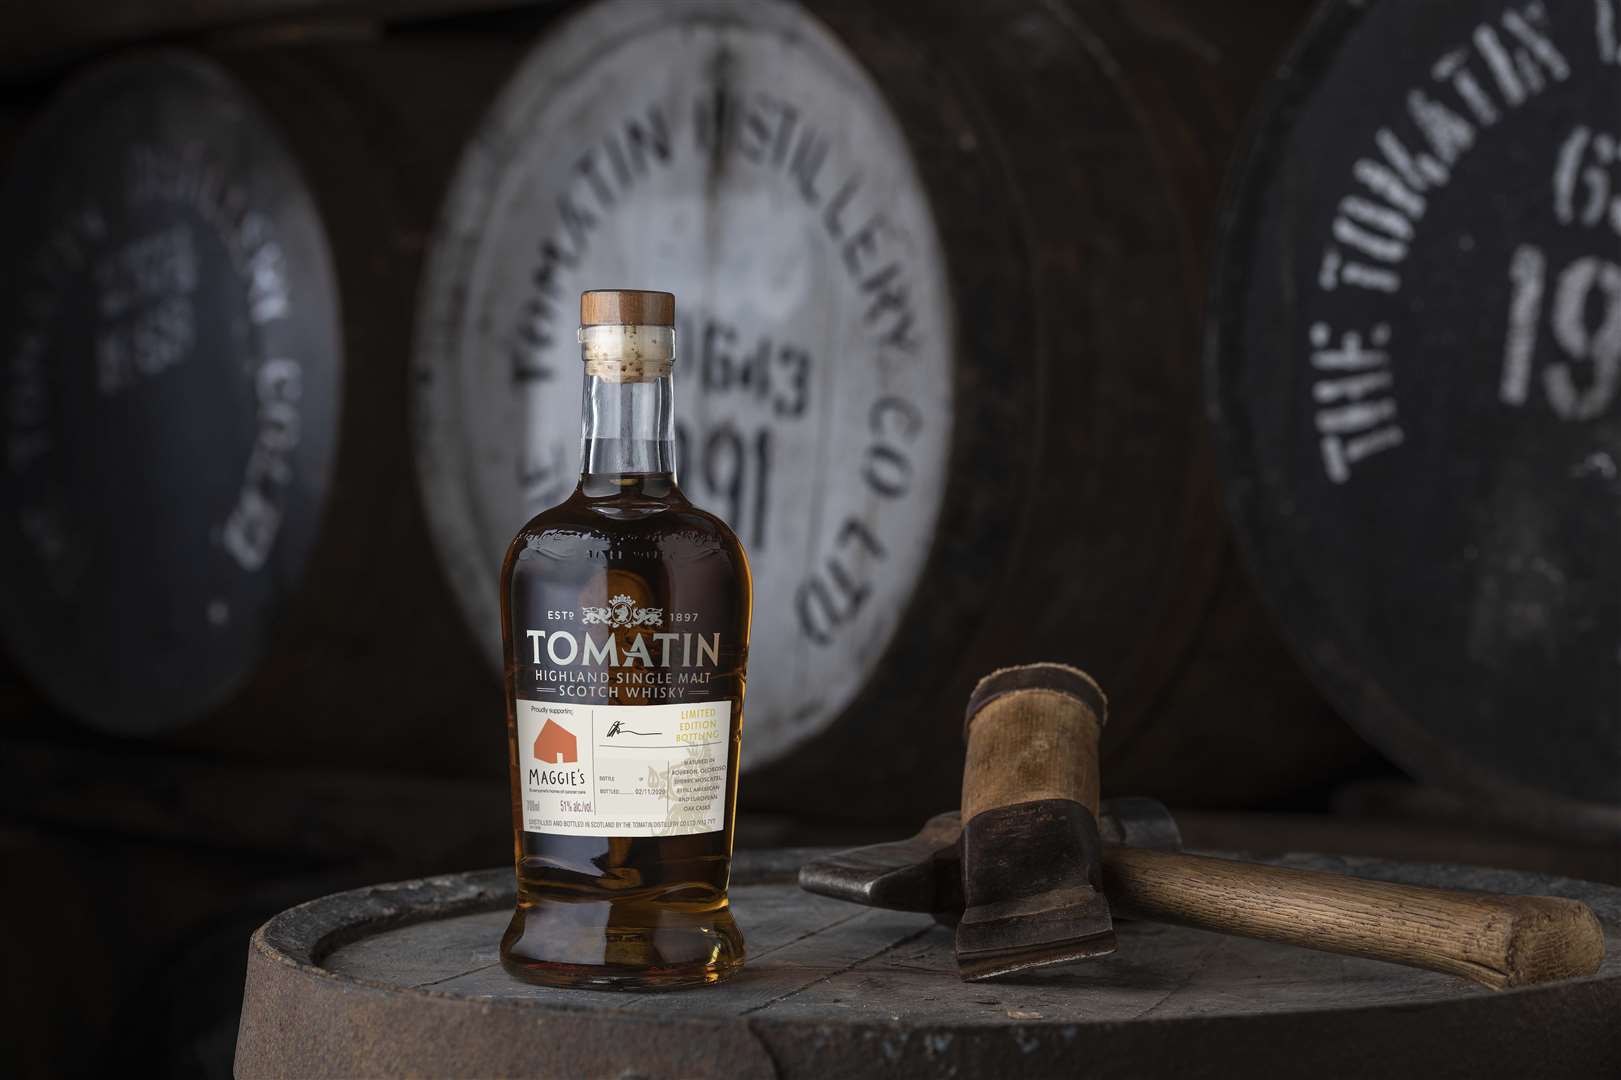 Tomatin Distillery is announcing a unique expression of Tomatin Single Malt to celebrate raising £50,000 for Maggie's Highlands.